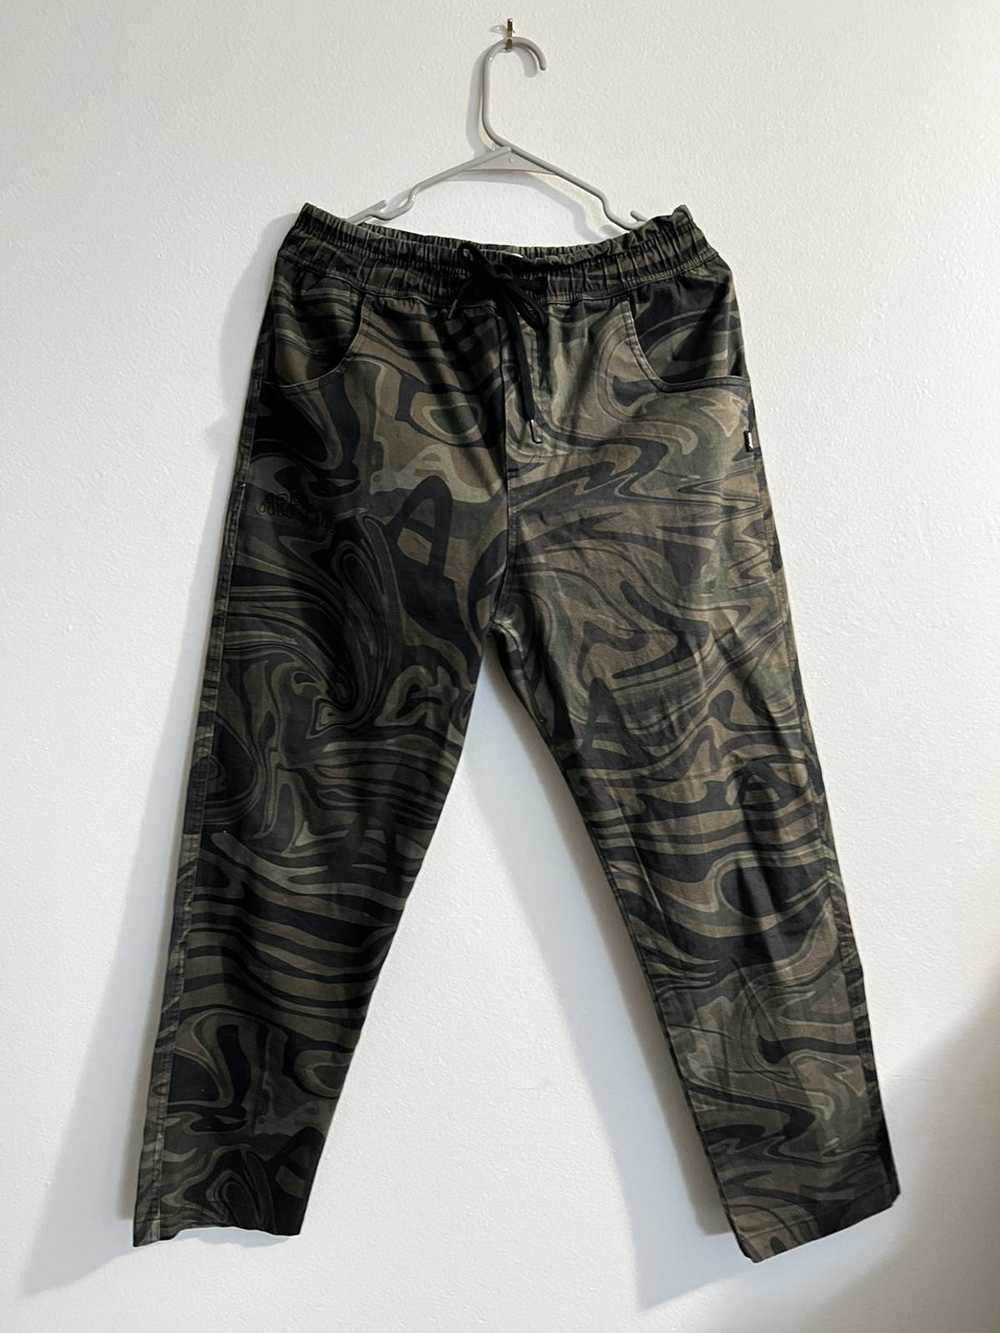 Just Approve × Streetwear Camo pants - image 2